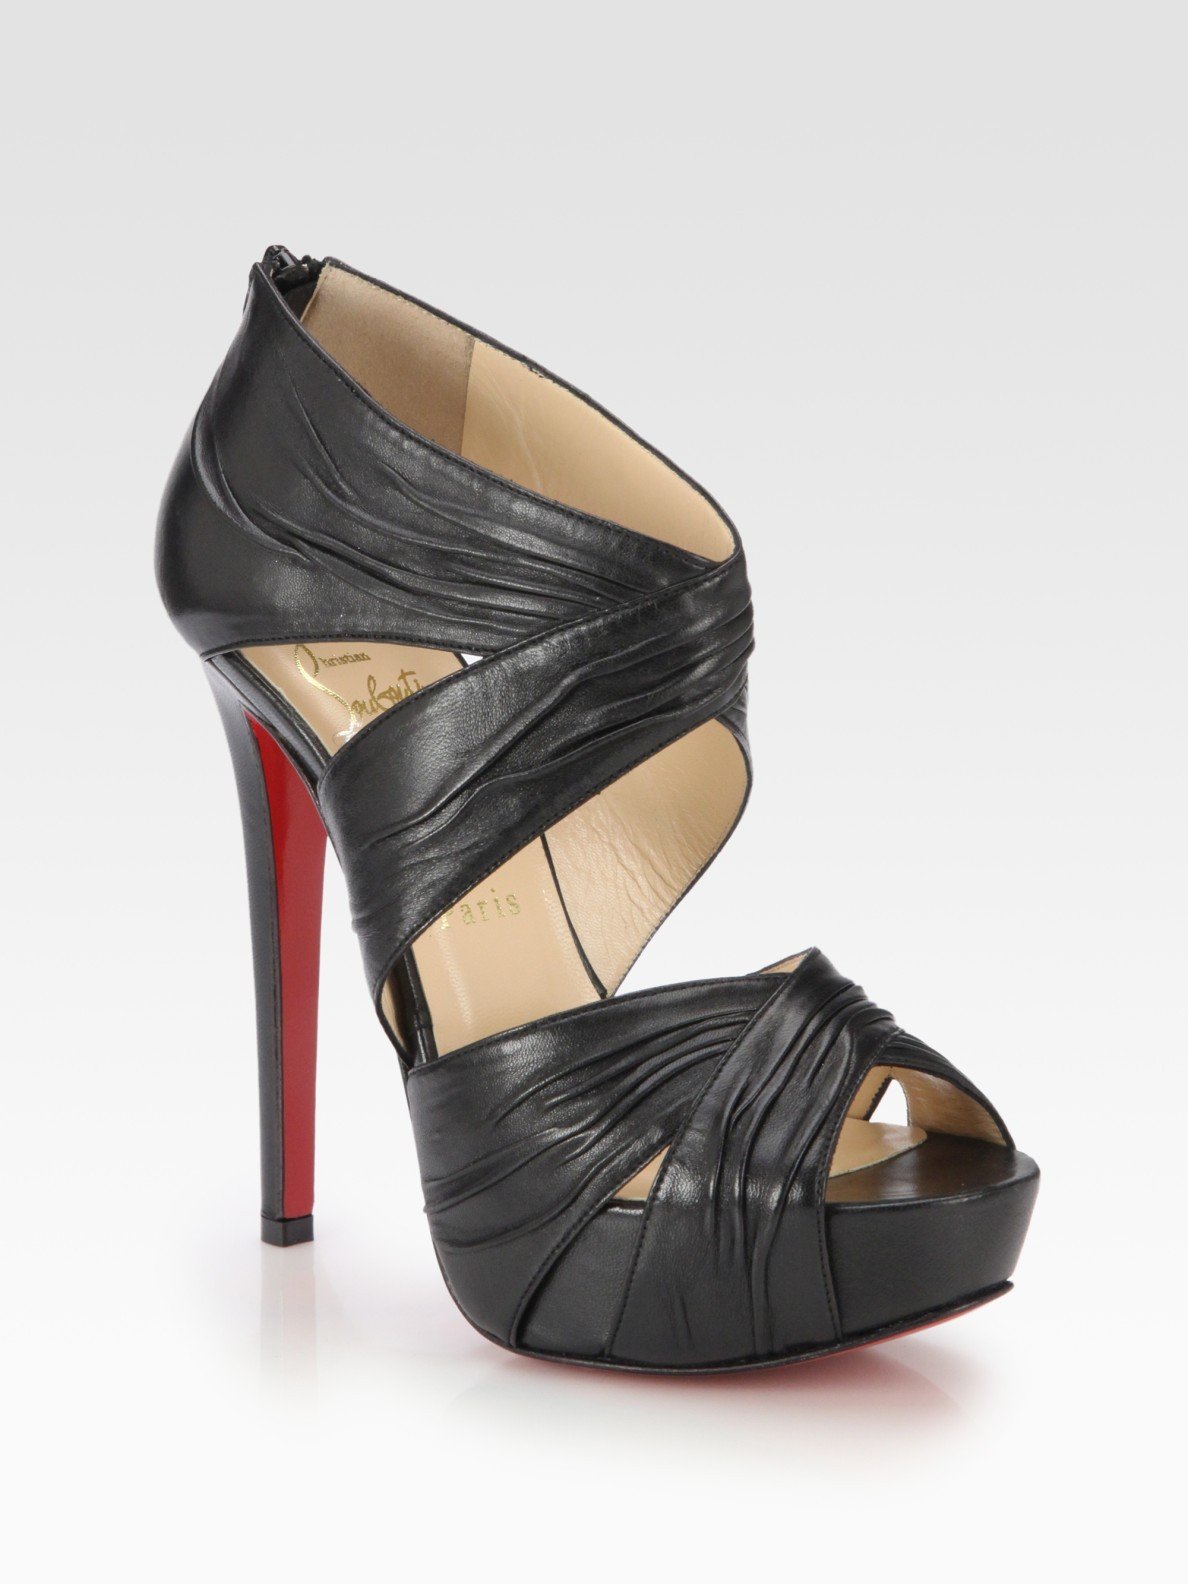 Louboutin Bandra Sandals in Black Leather — UFO No More